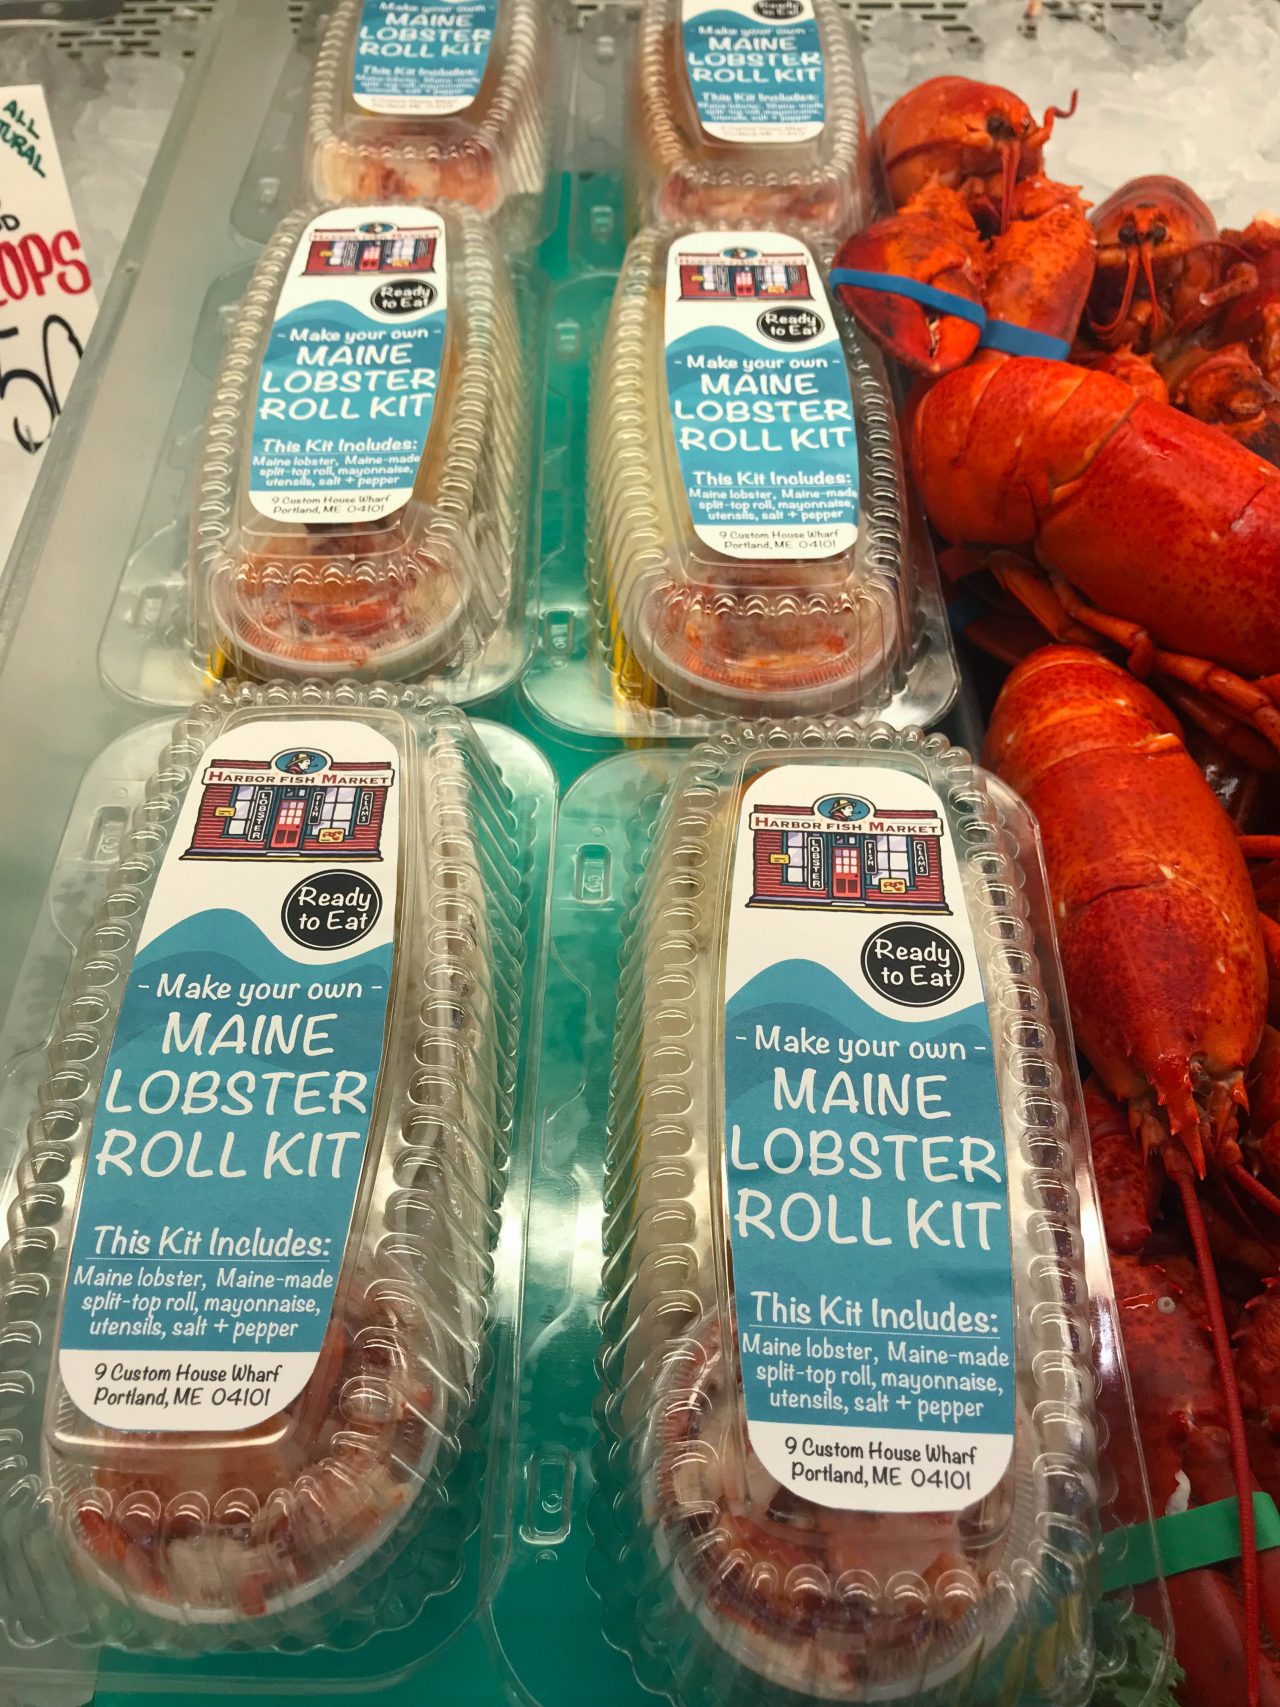 Maine Lobster Roll Kits are on Memorial Day!!! • Harbor Fish Market